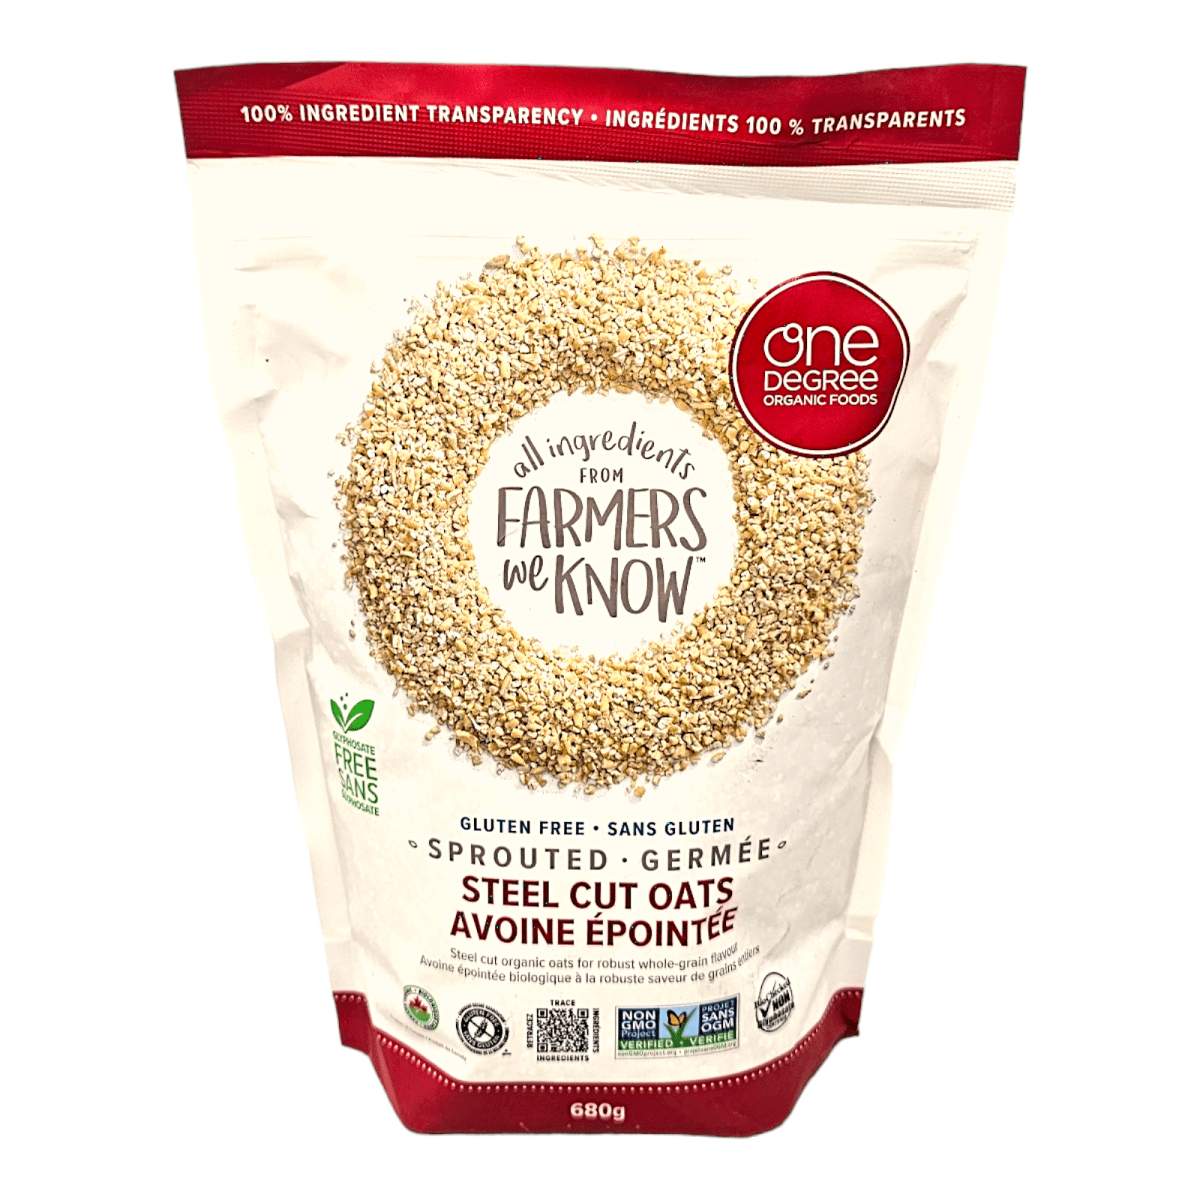 One Degree Sprouted Steel Cut Oats (680g)